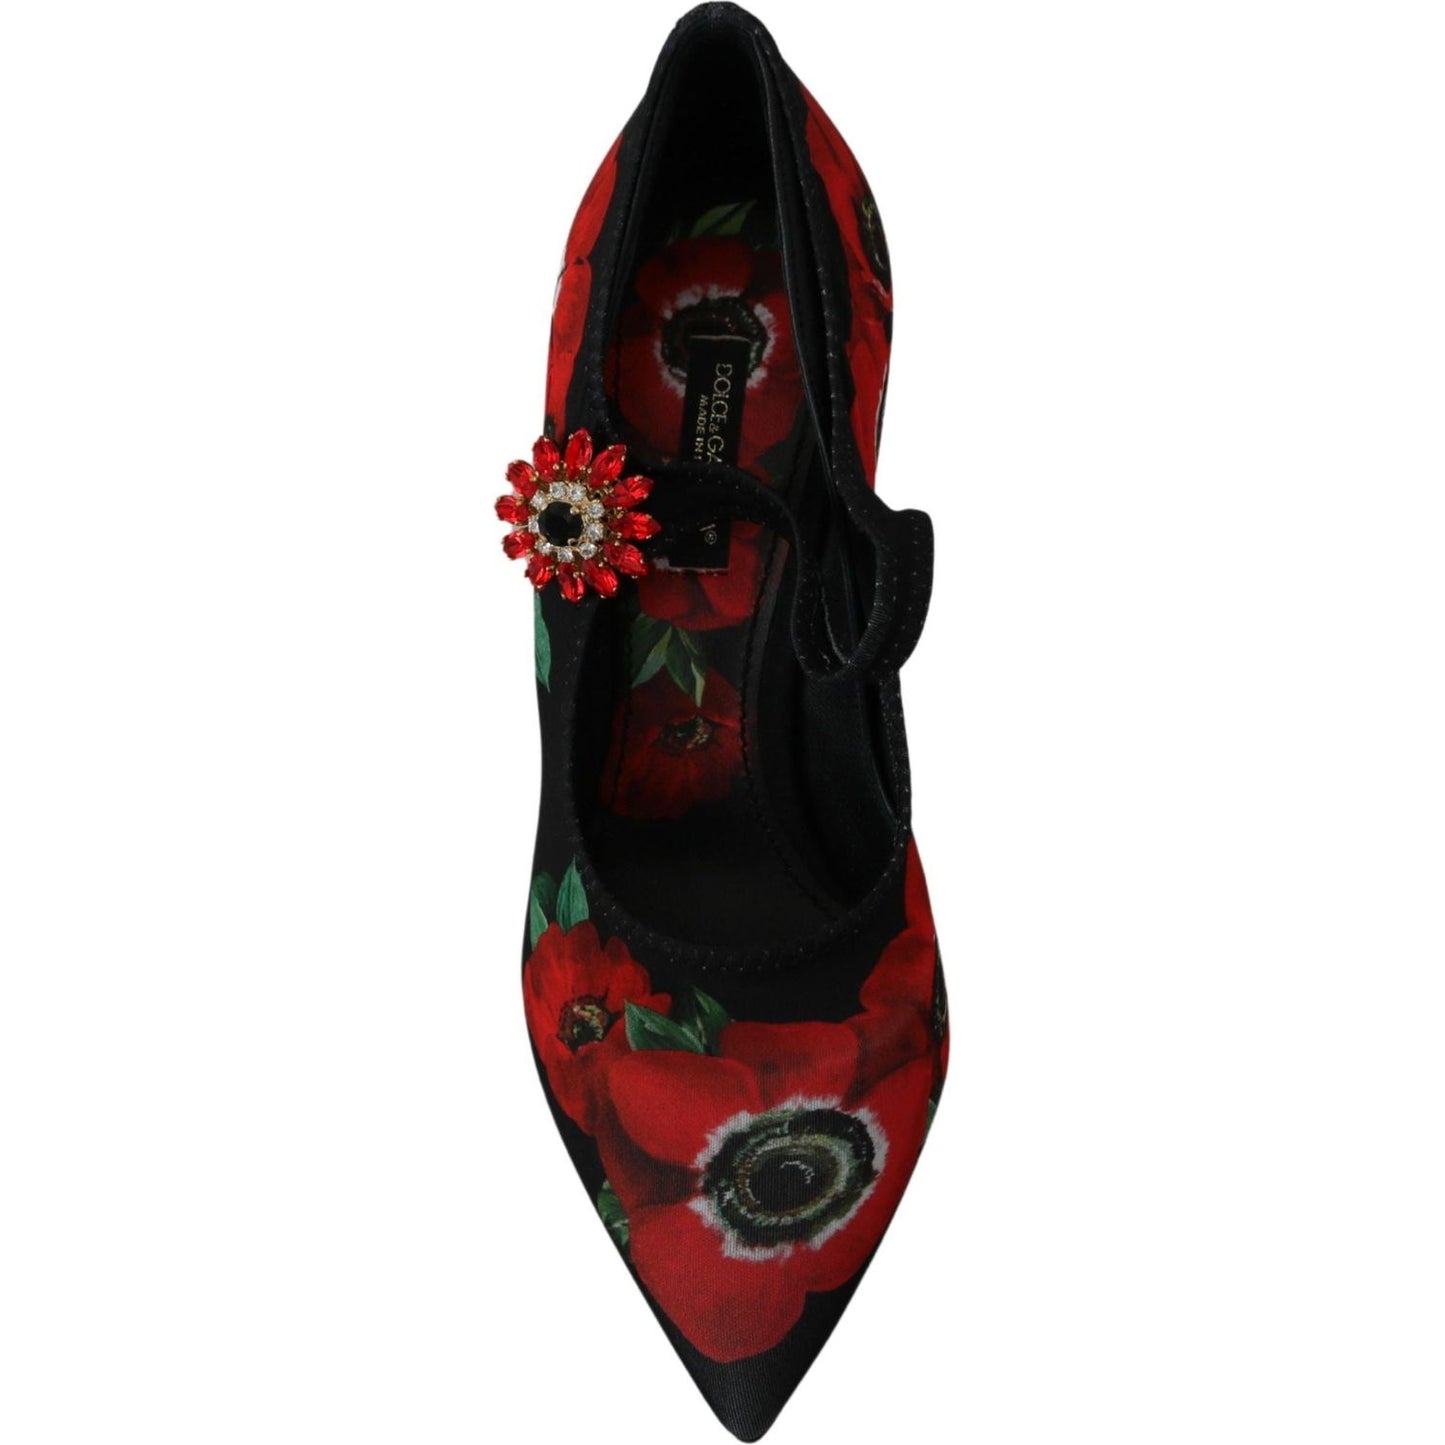 Dolce & Gabbana Floral Mary Janes Pumps with Crystal Detail black-red-floral-mary-janes-pumps-shoes Shoes IMG_0222-scaled-e62aa16a-2c2.jpg